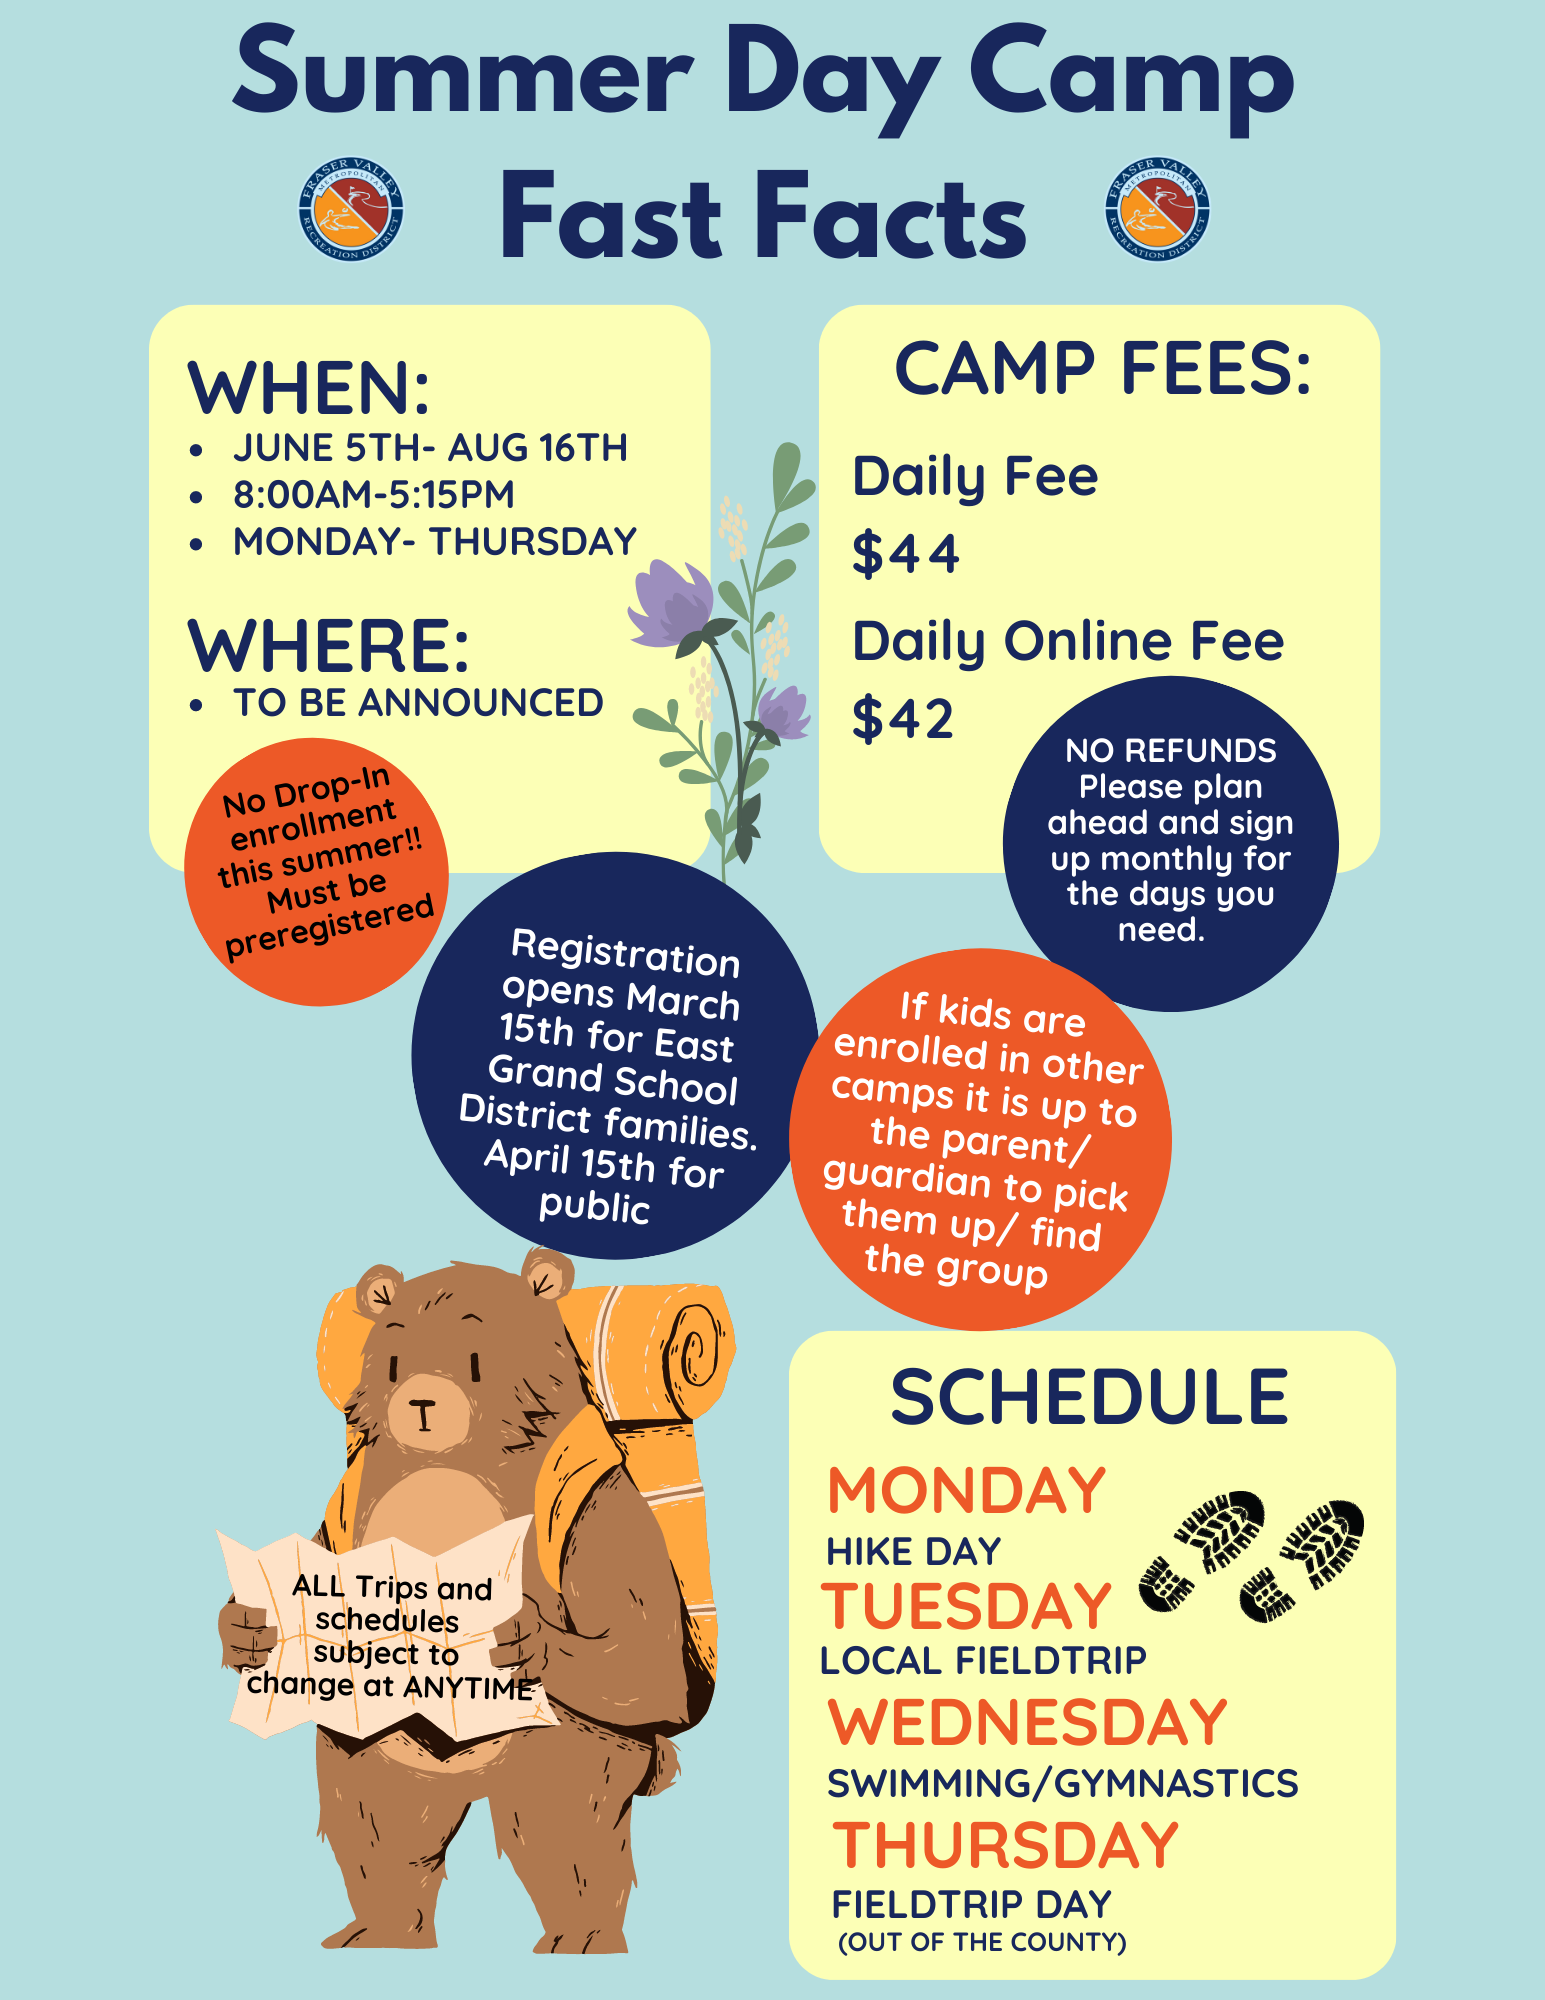 Summer Day Camp Fast Facts